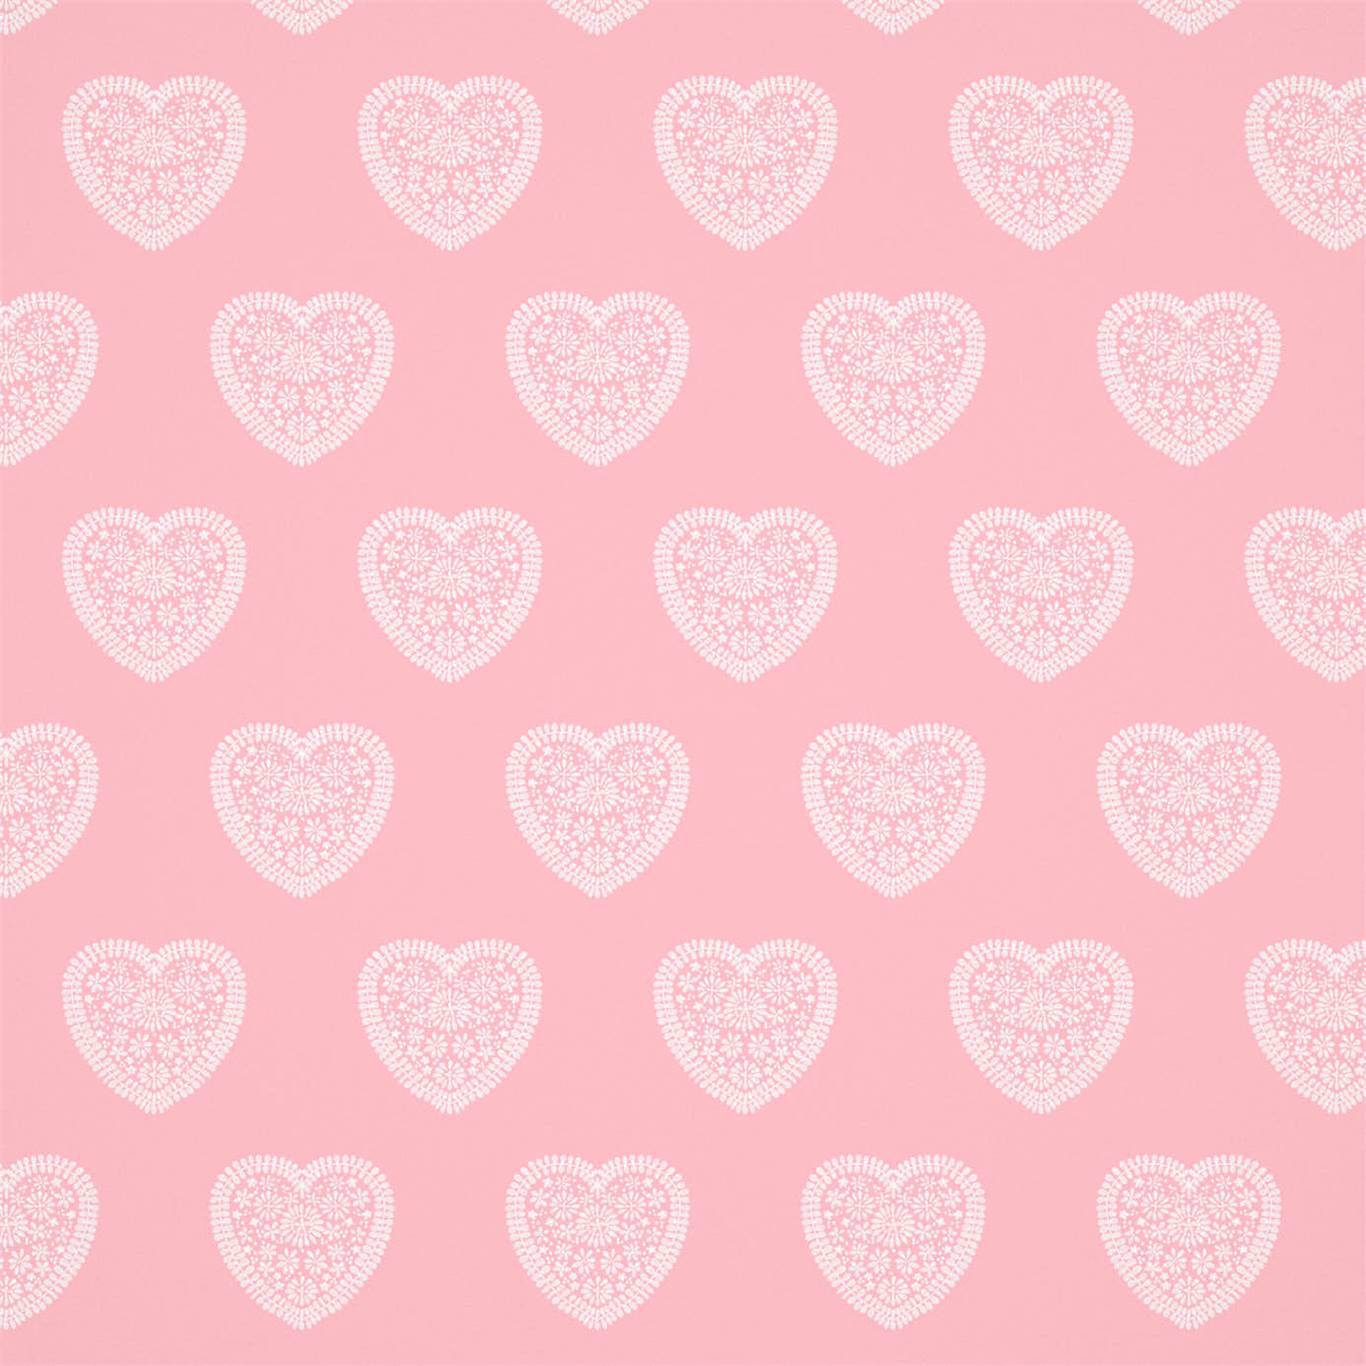 All About Me 110539 Sweet Hearts Soft Pink Wallpaper HLTF112651 by Harlequin